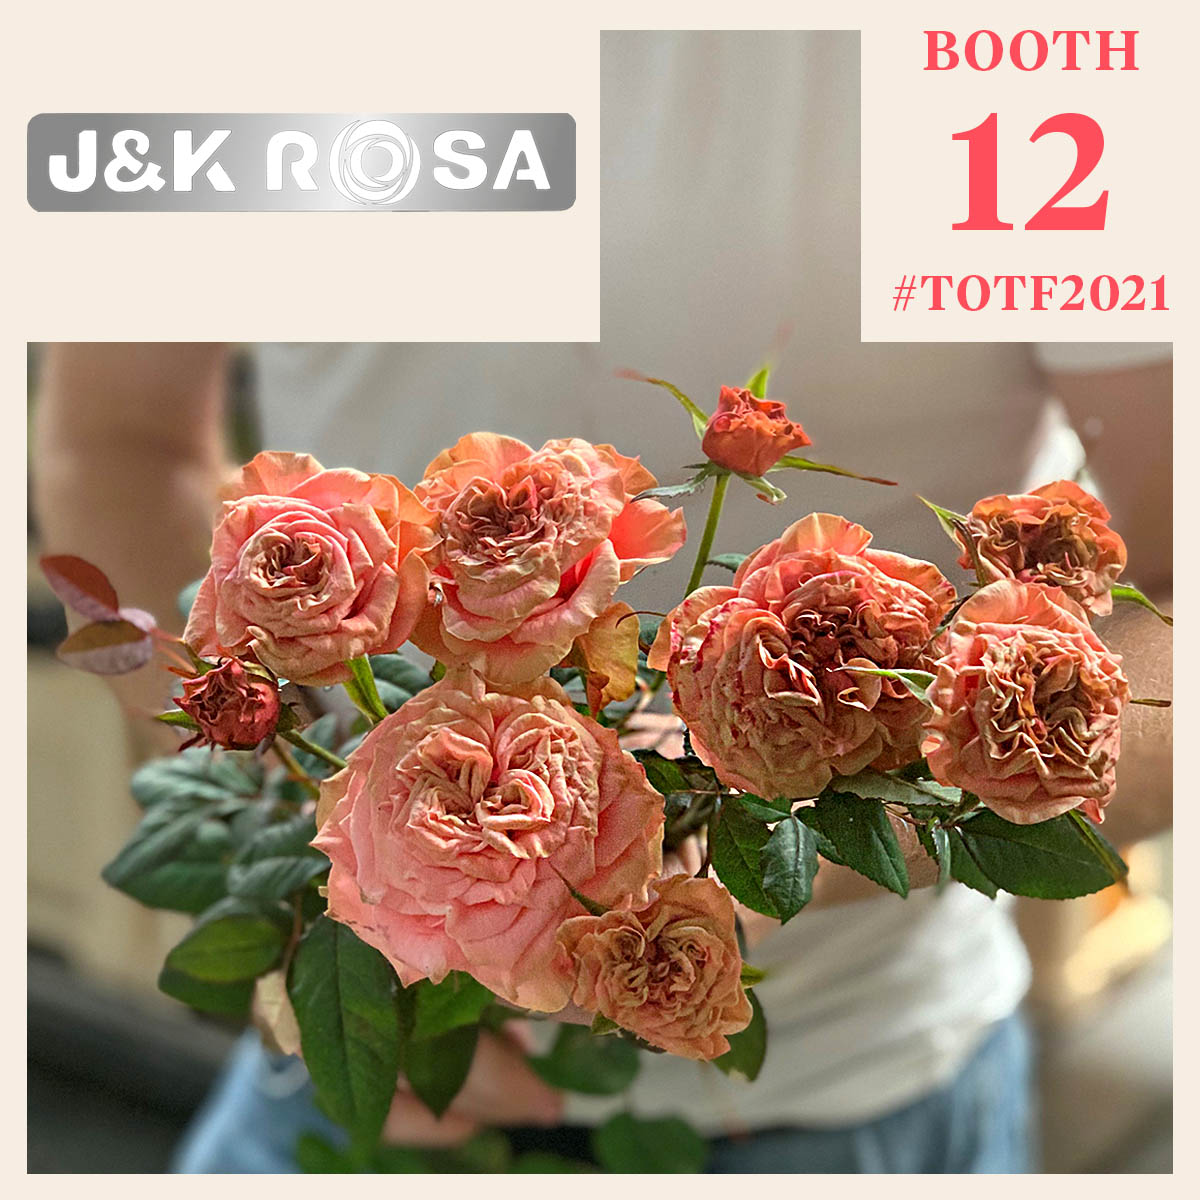 the-viking-specials-and-the-queen-rose-variety-of-jk-rosa-featured